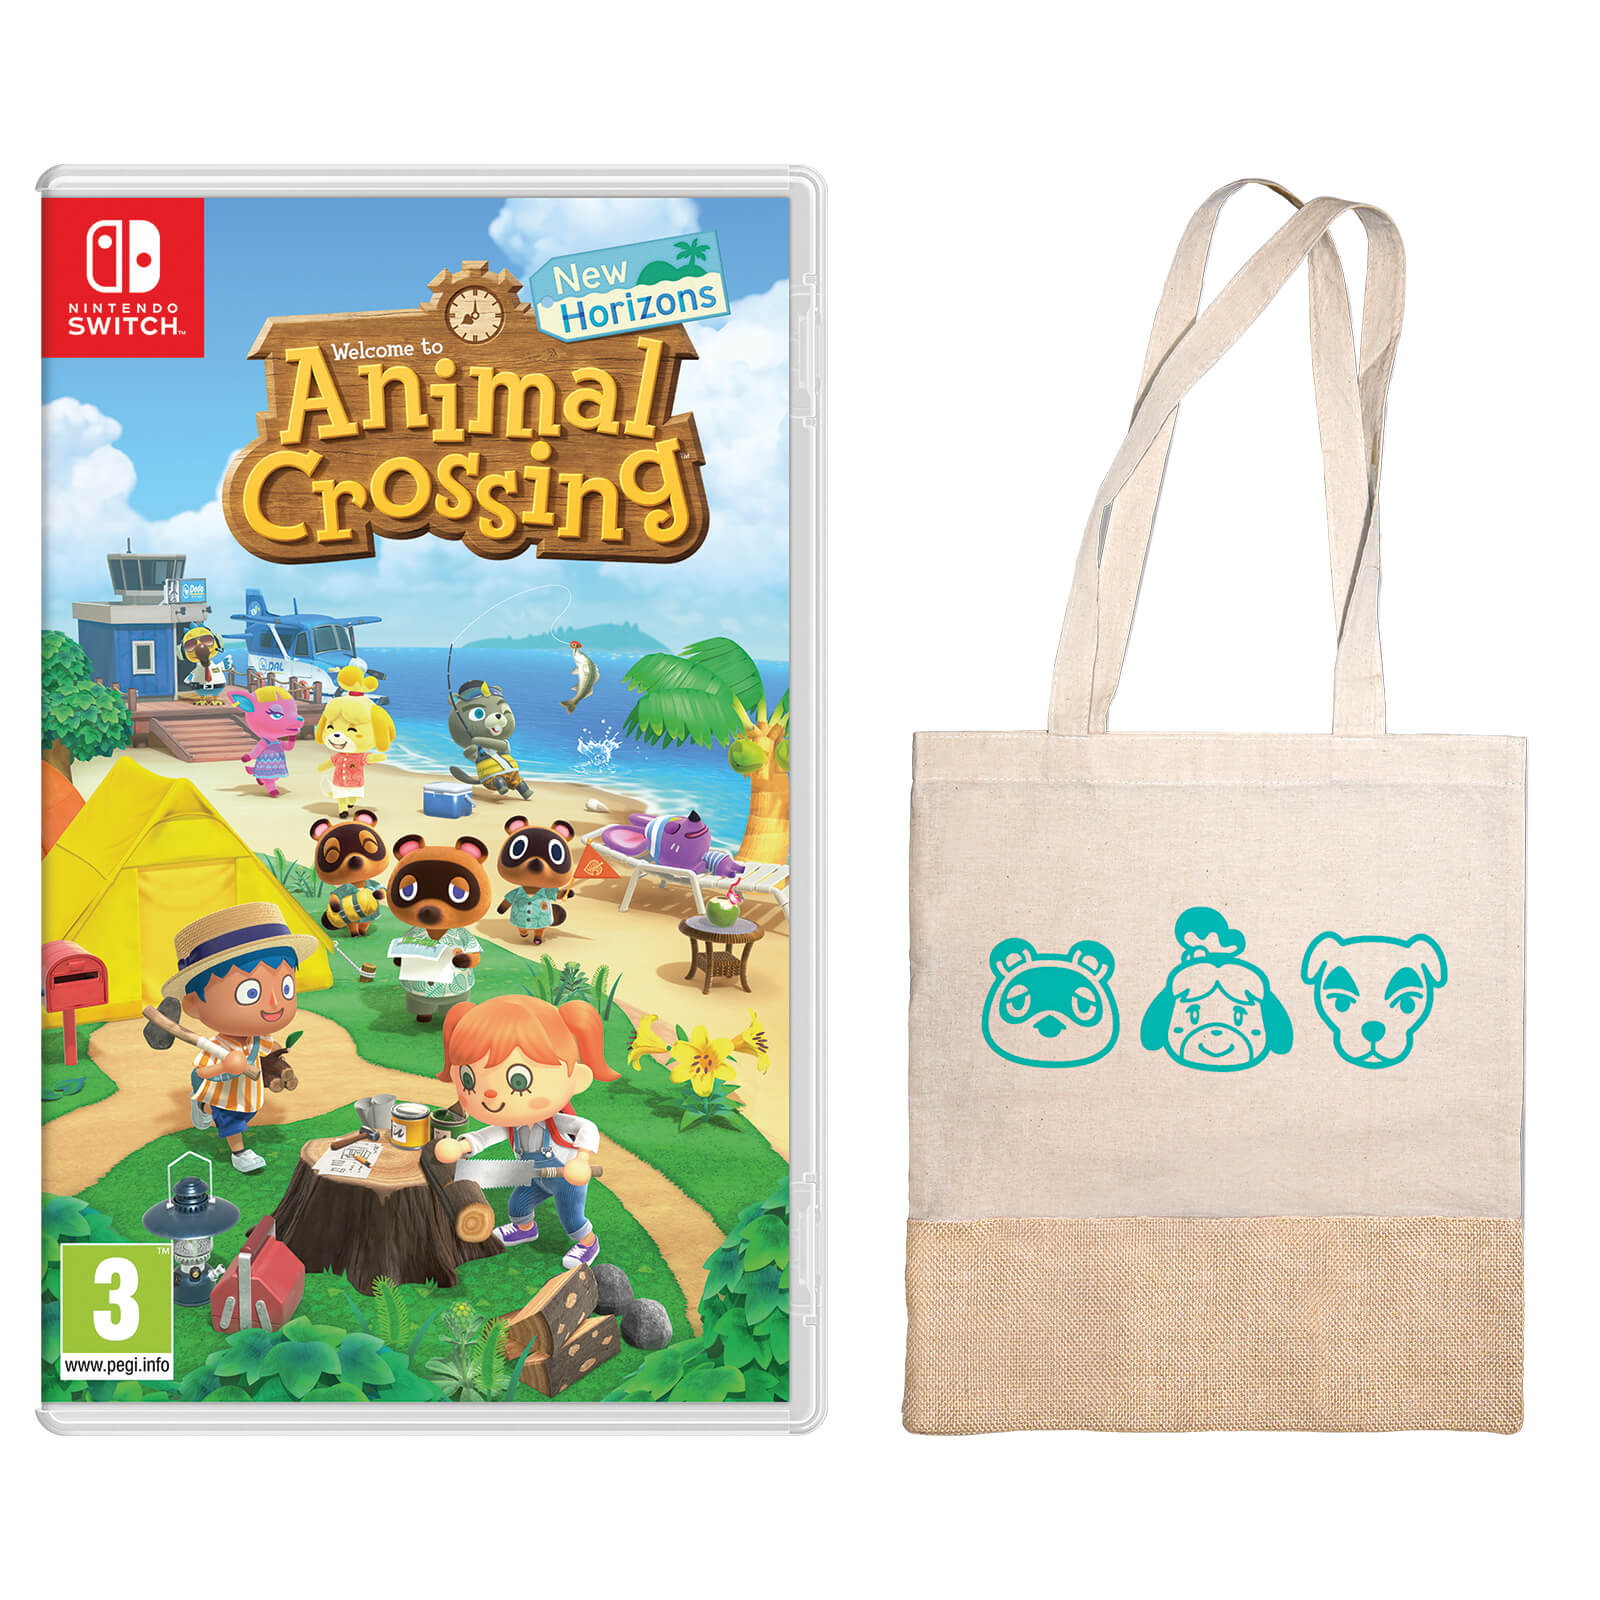 will the animal crossing switch be in stores